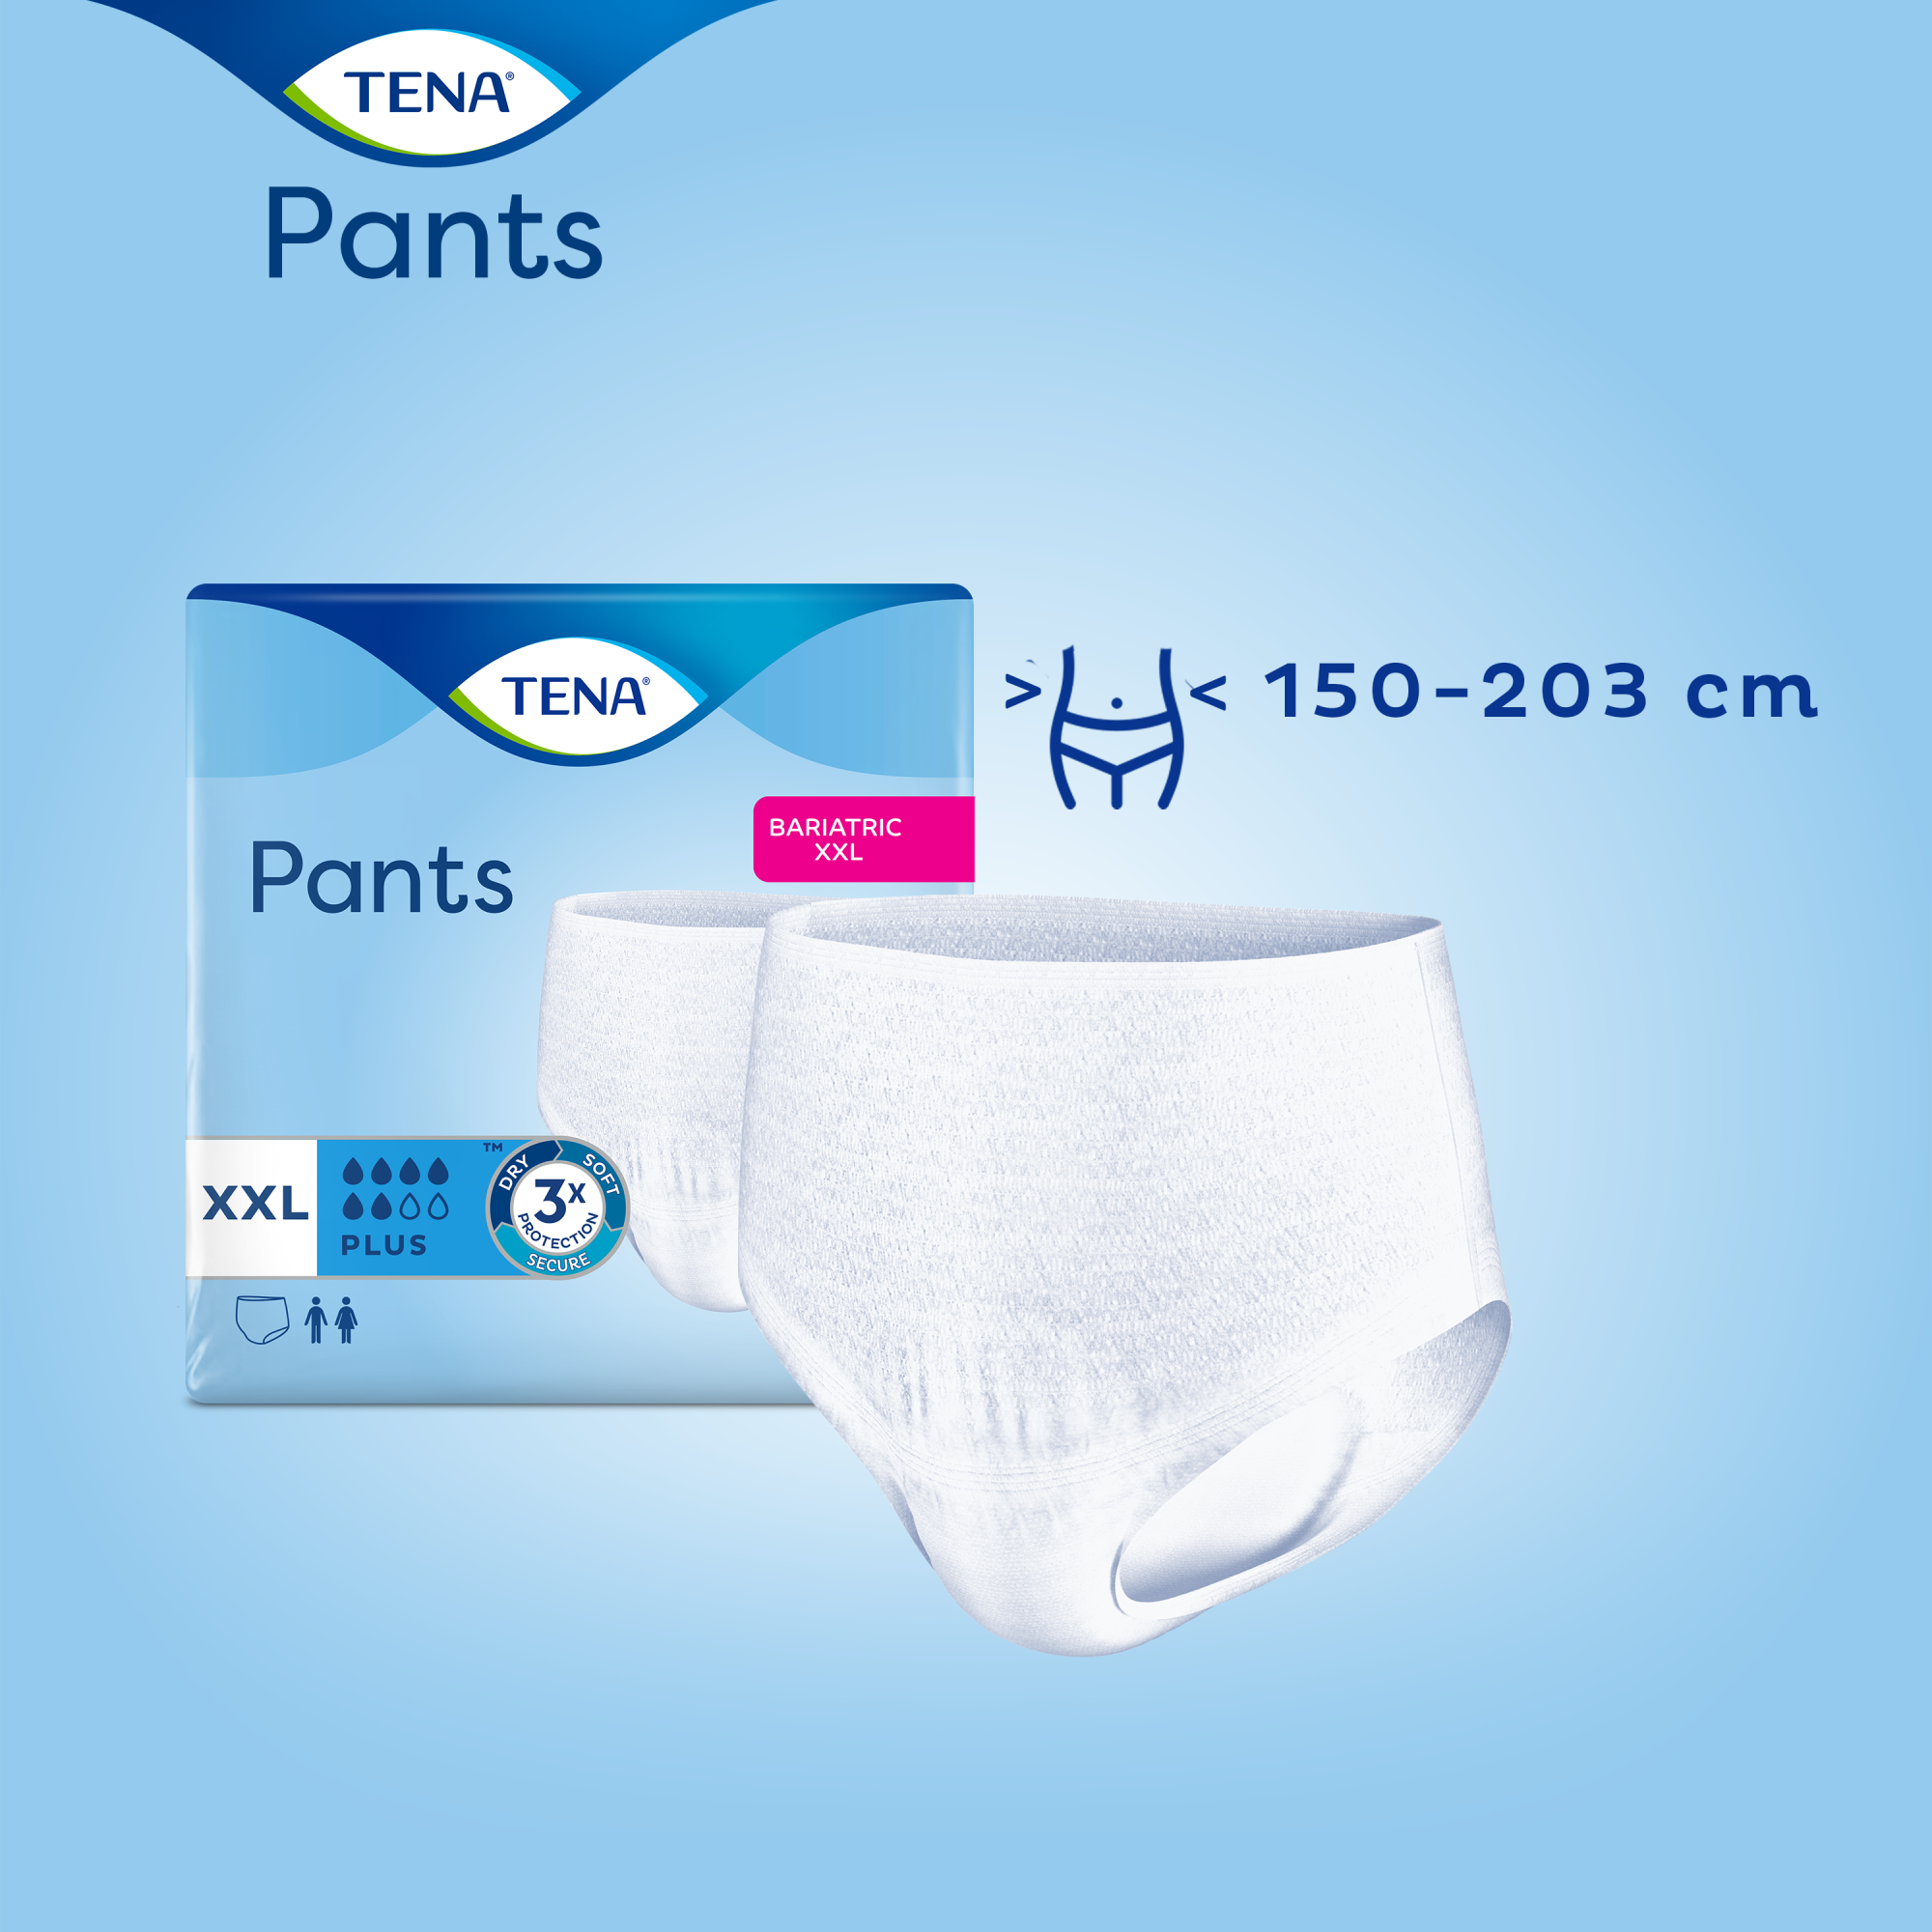 TENA Incontinence Underwear for Men, Maximum Absorbency, ProSkin - X-Large  - 56 Count : Amazon.co.uk: Health & Personal Care